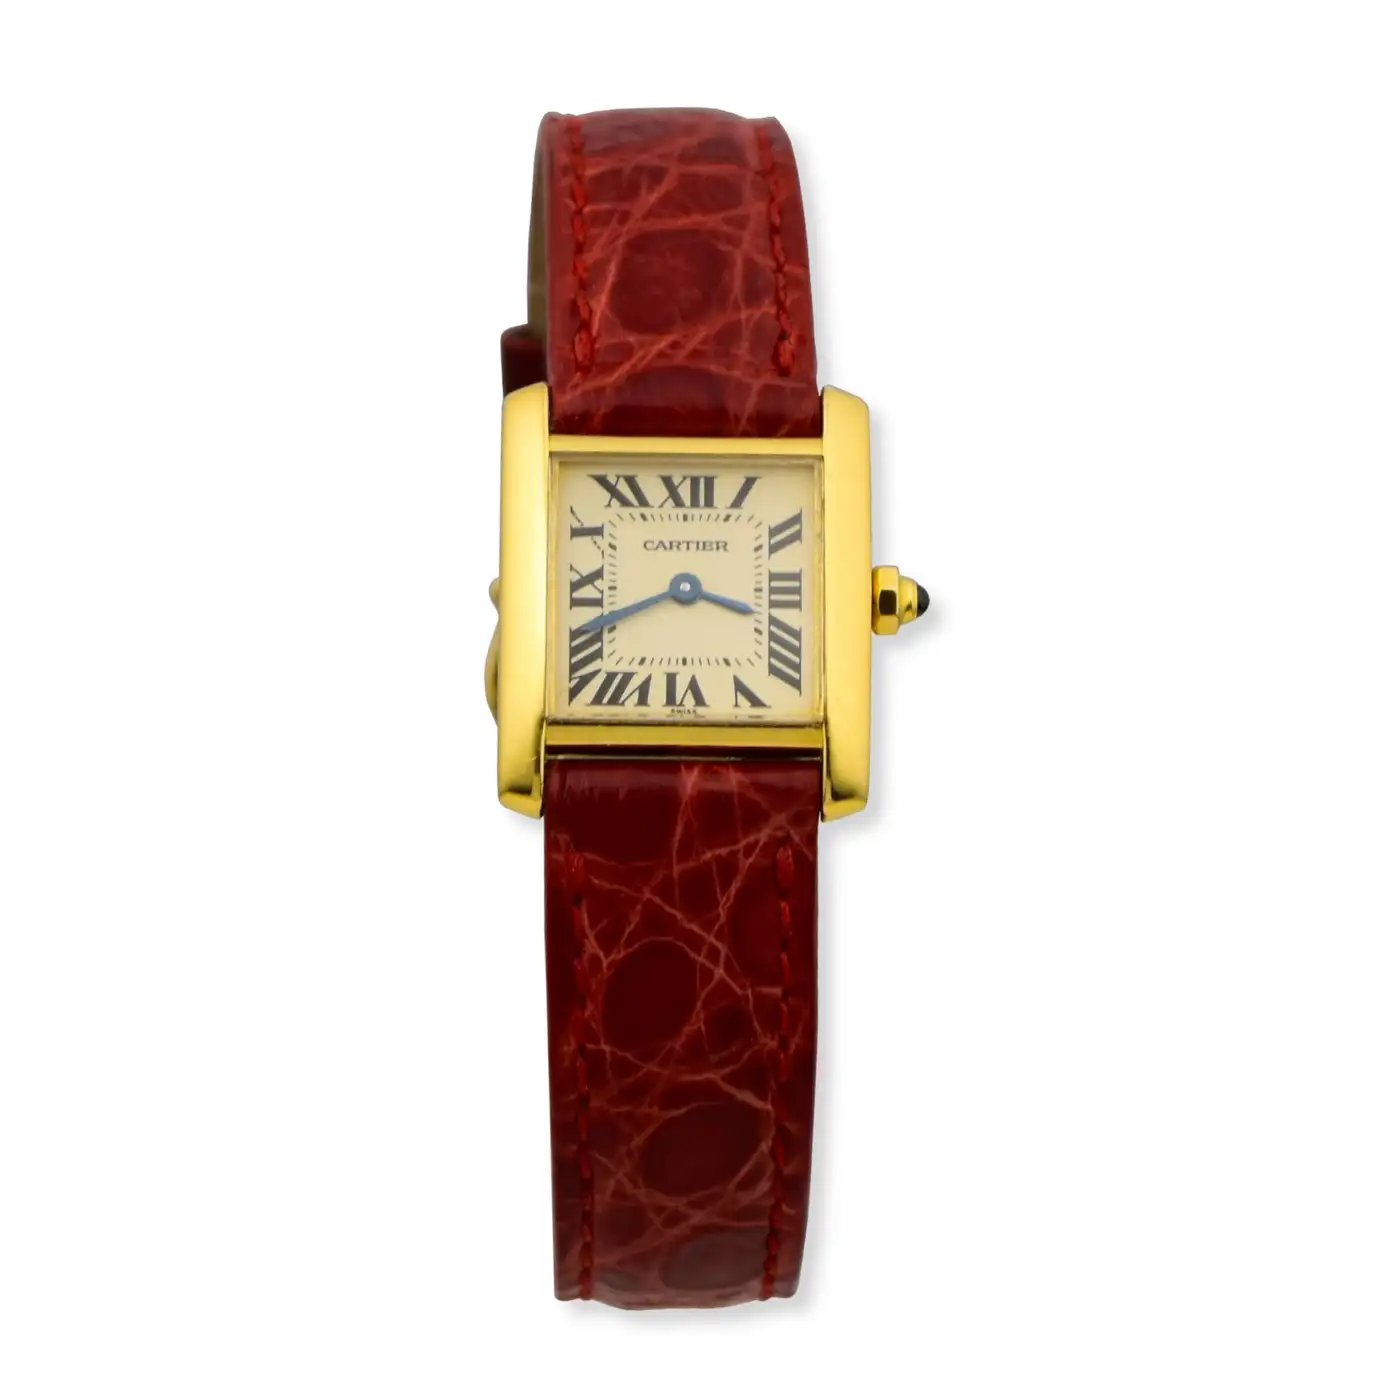 Cartier-Tank-Montres-Francaise-in-18k-Yellow-Gold-Watch-4.webp